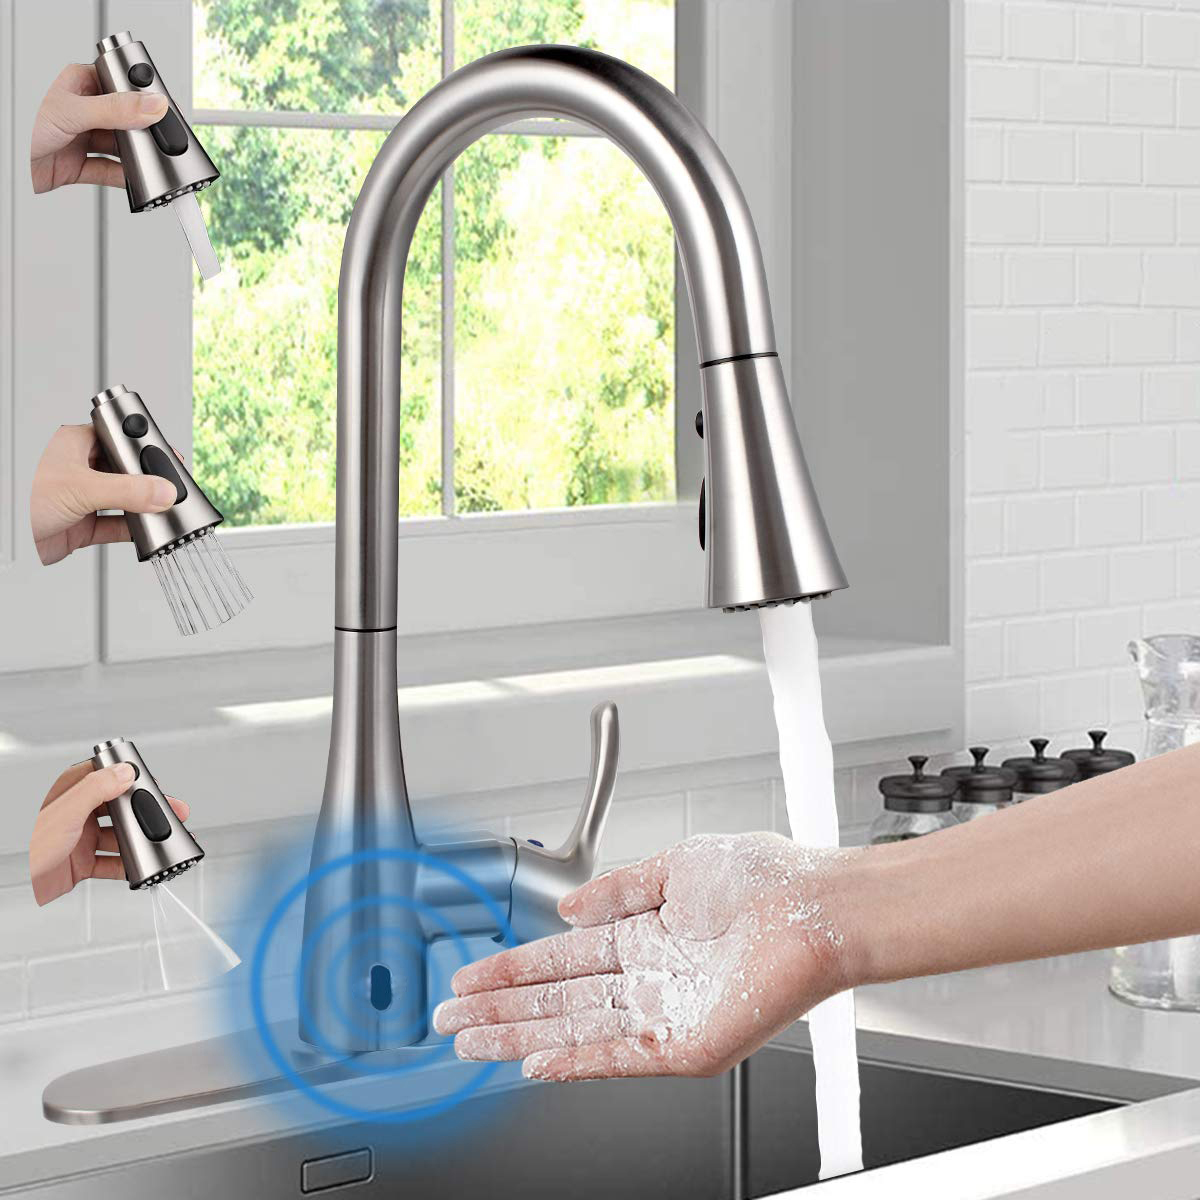 Aquacubic cUPC Infrared Sensor Kitchen Sink Faucets Spring Mixer Sensor Faucets with Pull Down Sprayer